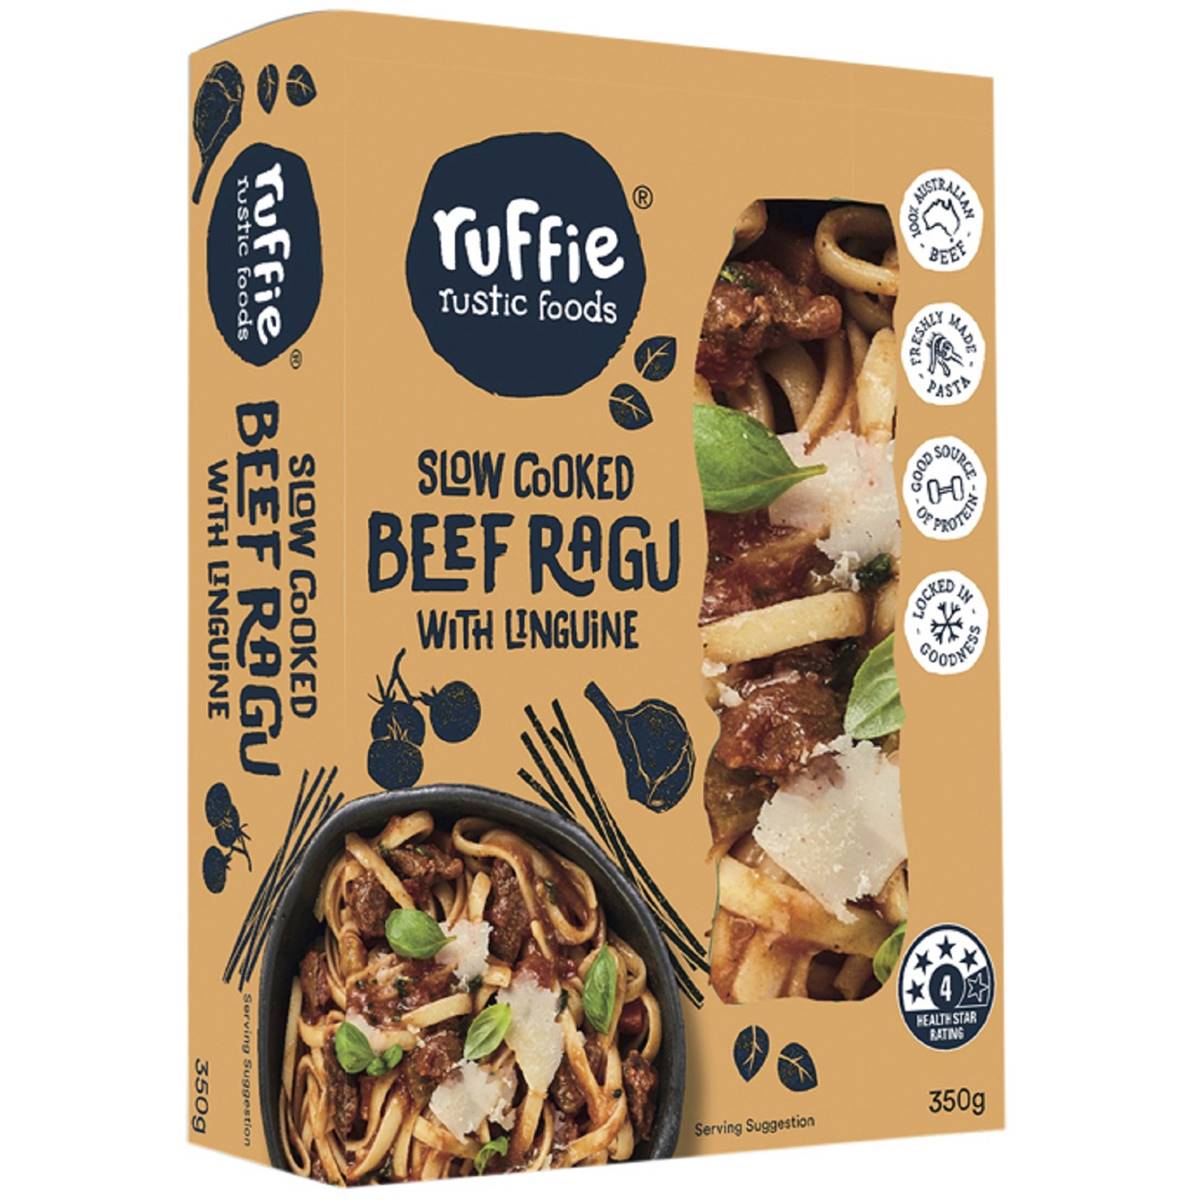 Ruffie Rustic Foods Slow Cooked Beef Ragu With Linguine